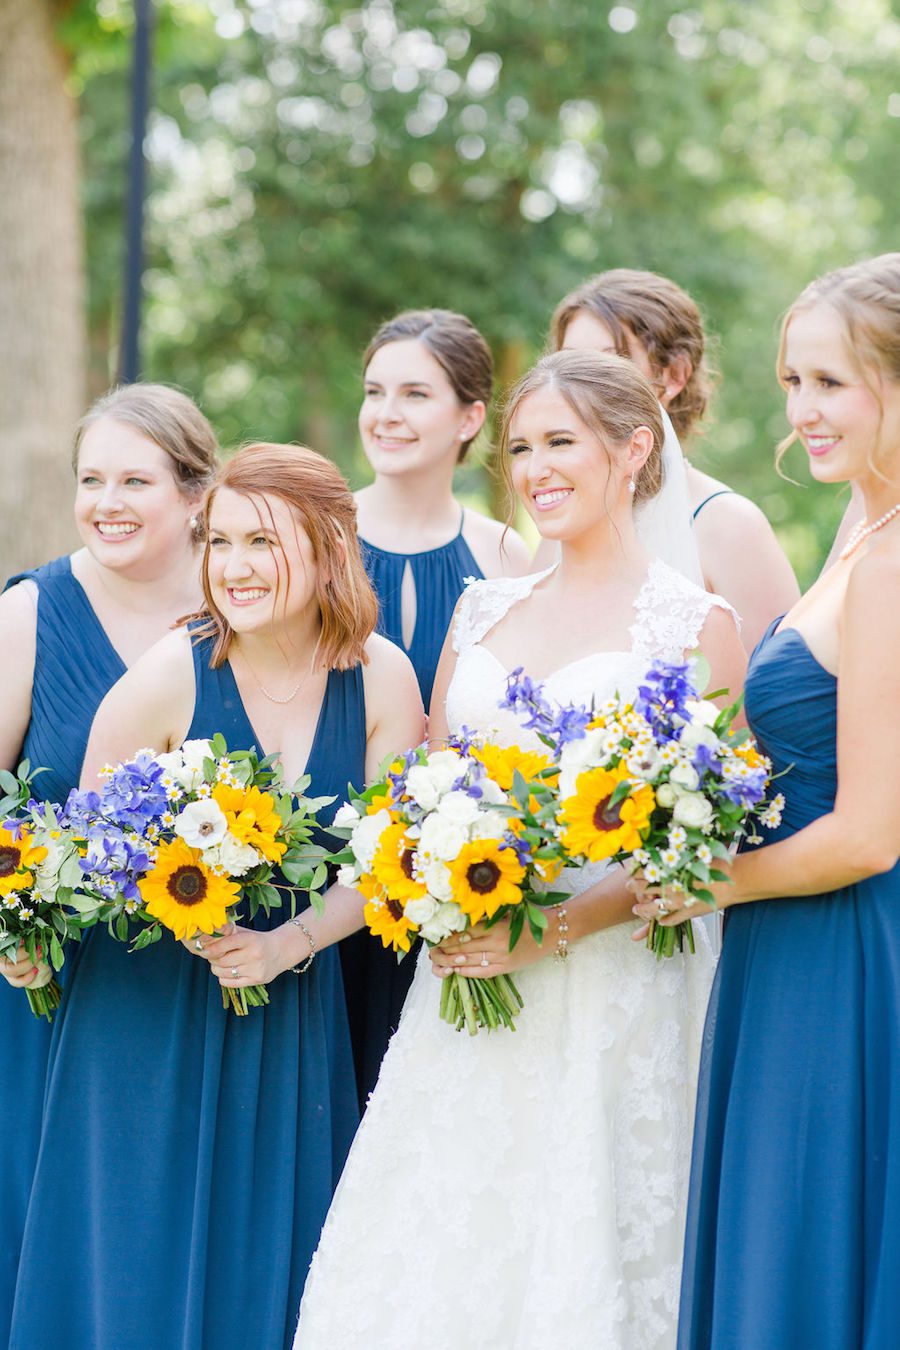 Emily Alyssa Photography was the photographer for this Rust Manor House wedding in Leesburg, Virginia.